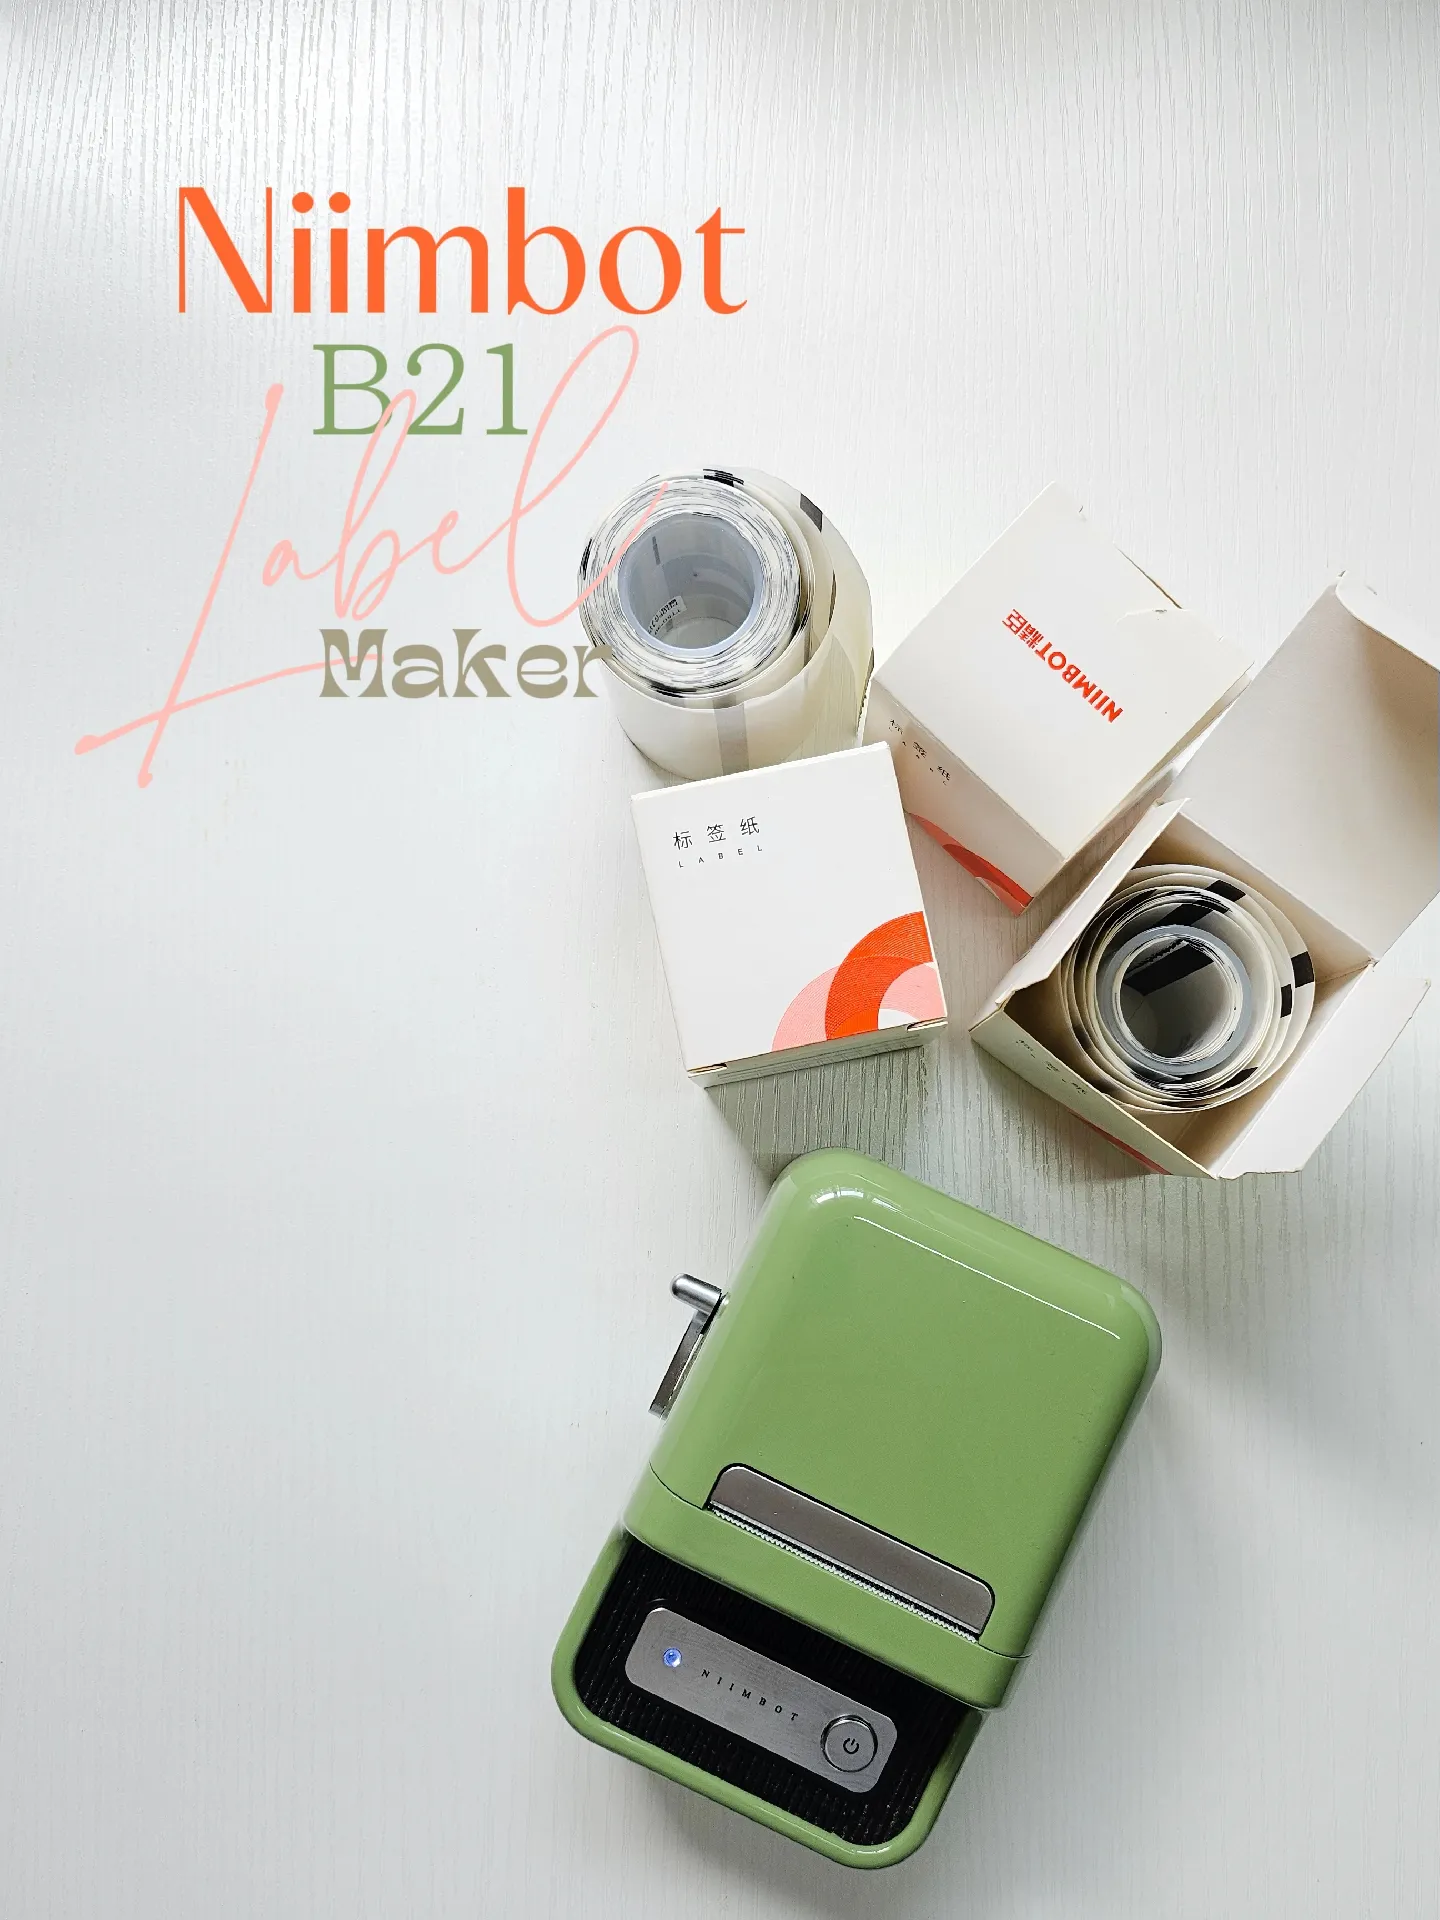 Niimbot B21 Label Maker!, Gallery posted by DIYrUs